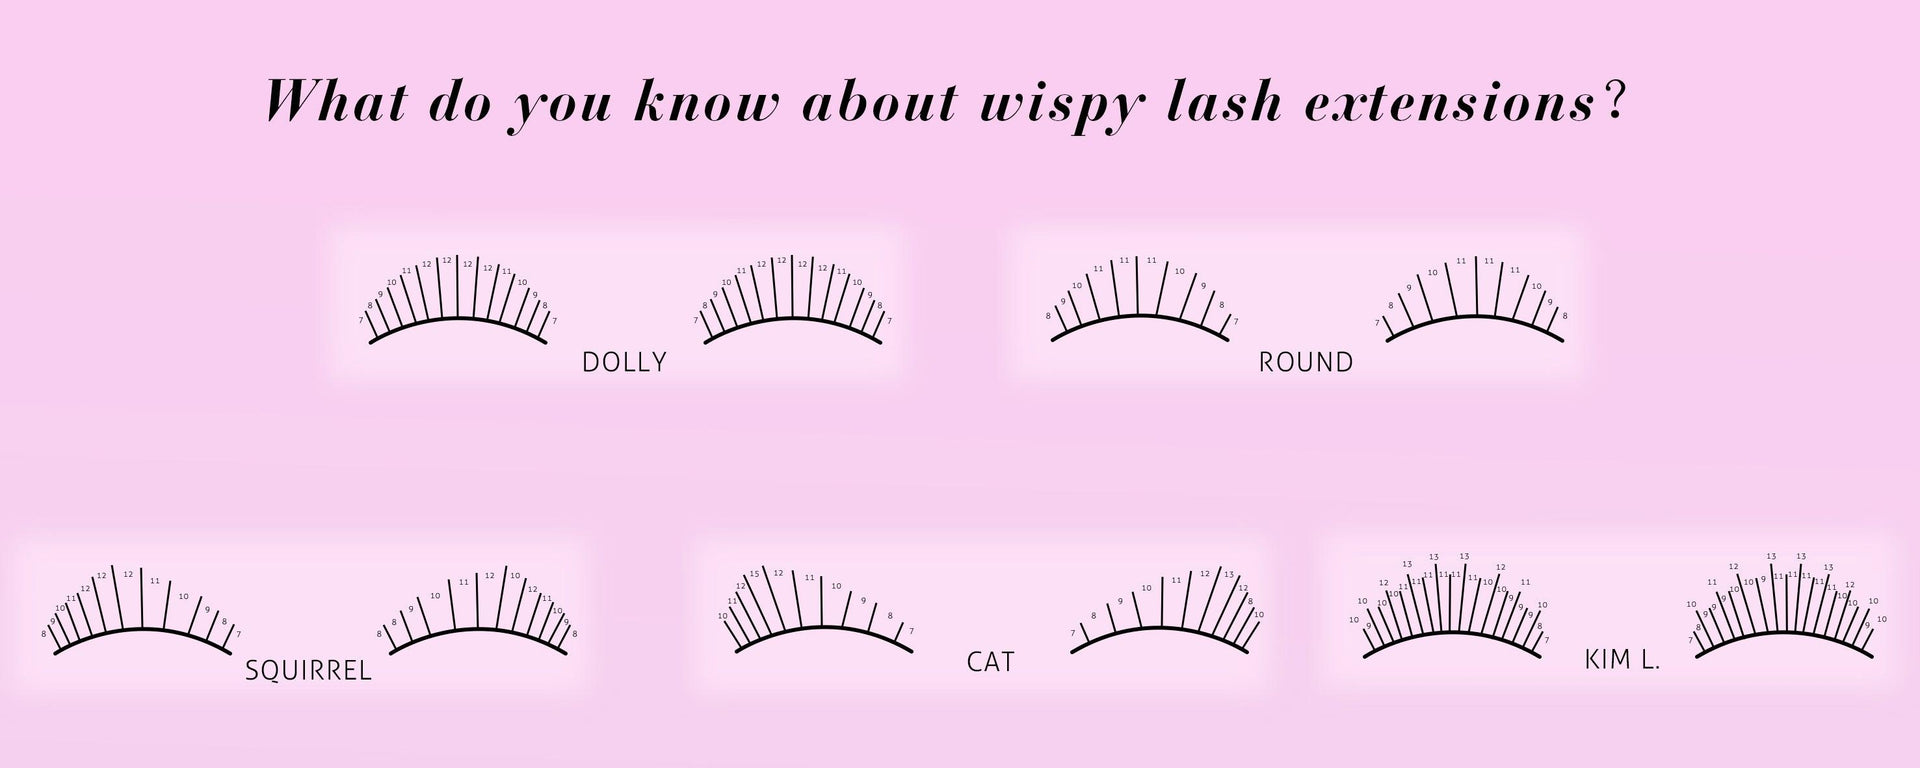 What do you know about wispy lash extensions?